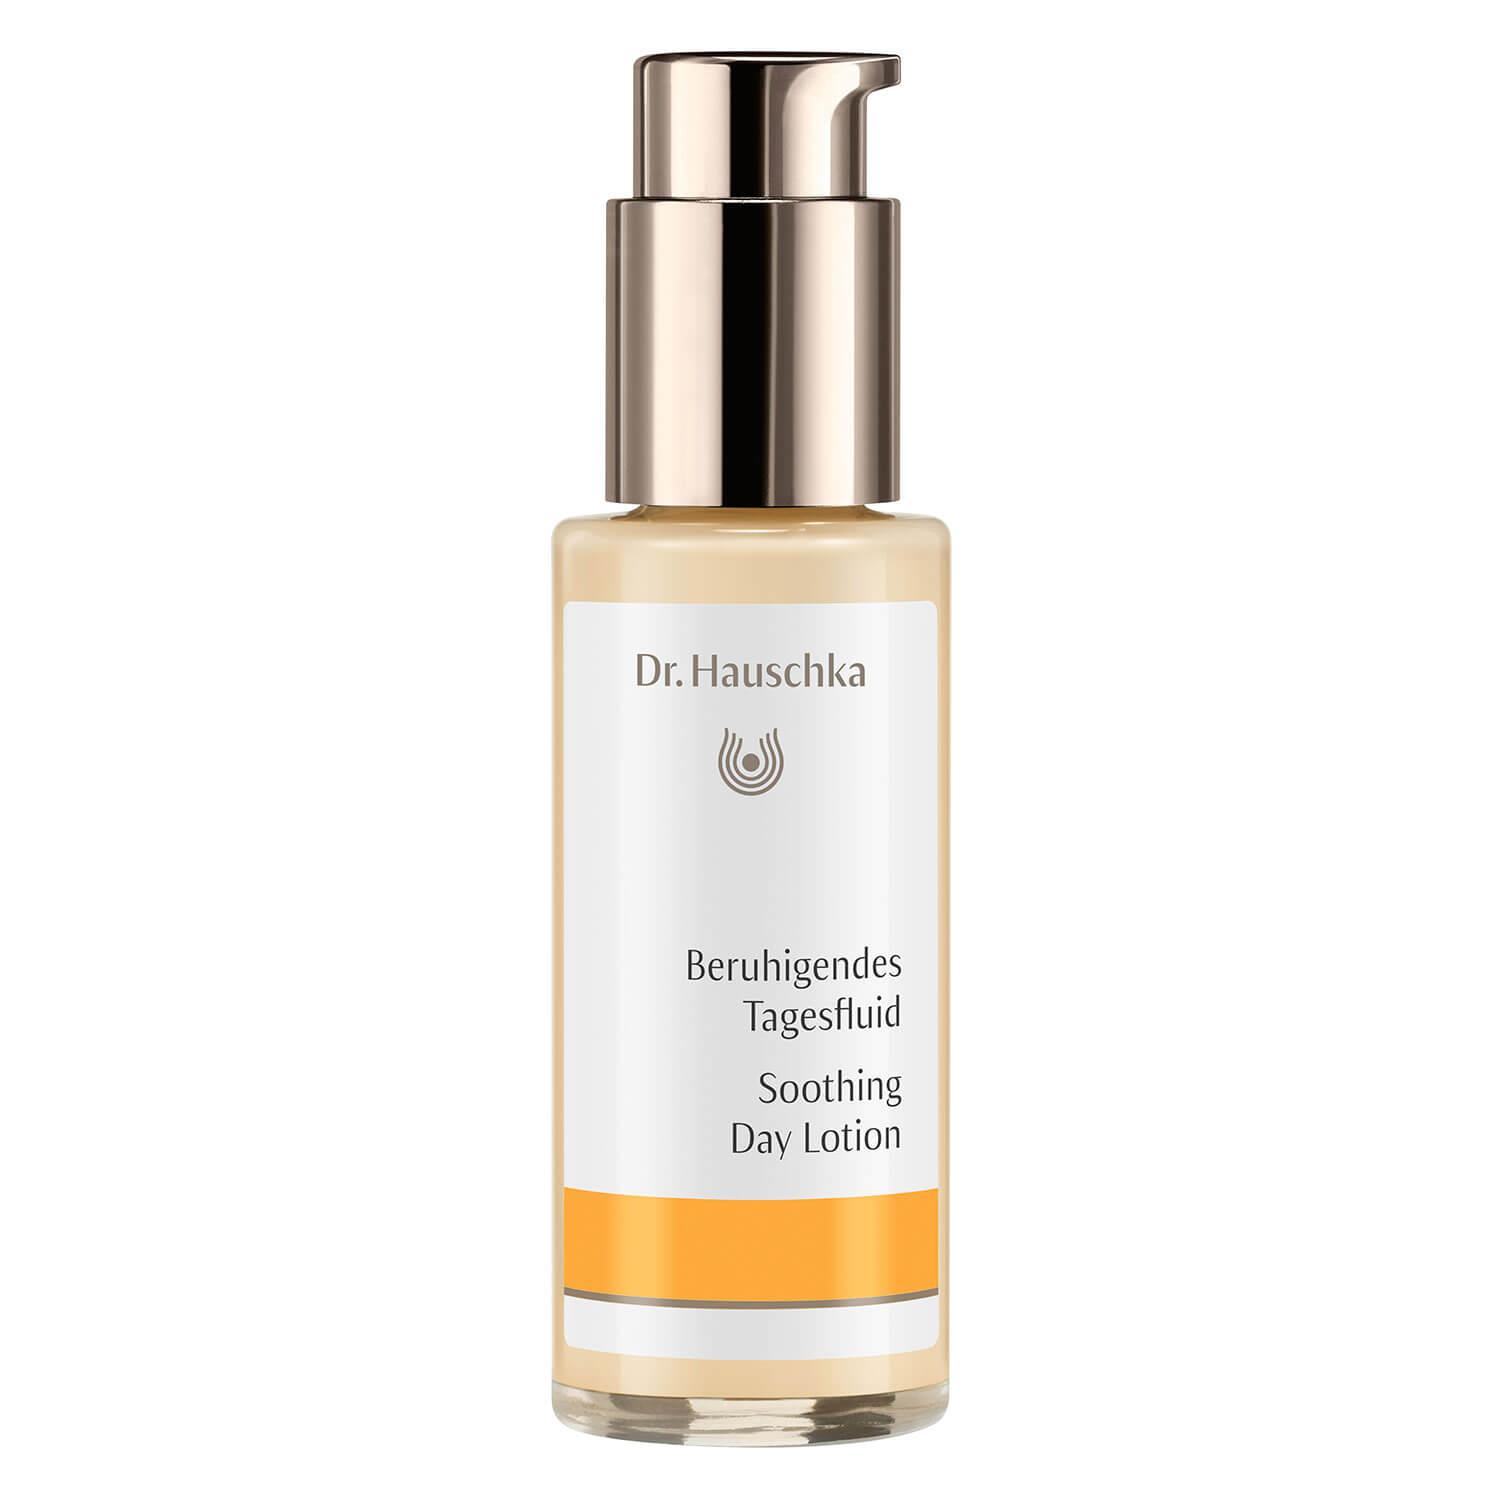 Dr. Hauschka - Soothing Day Lotion